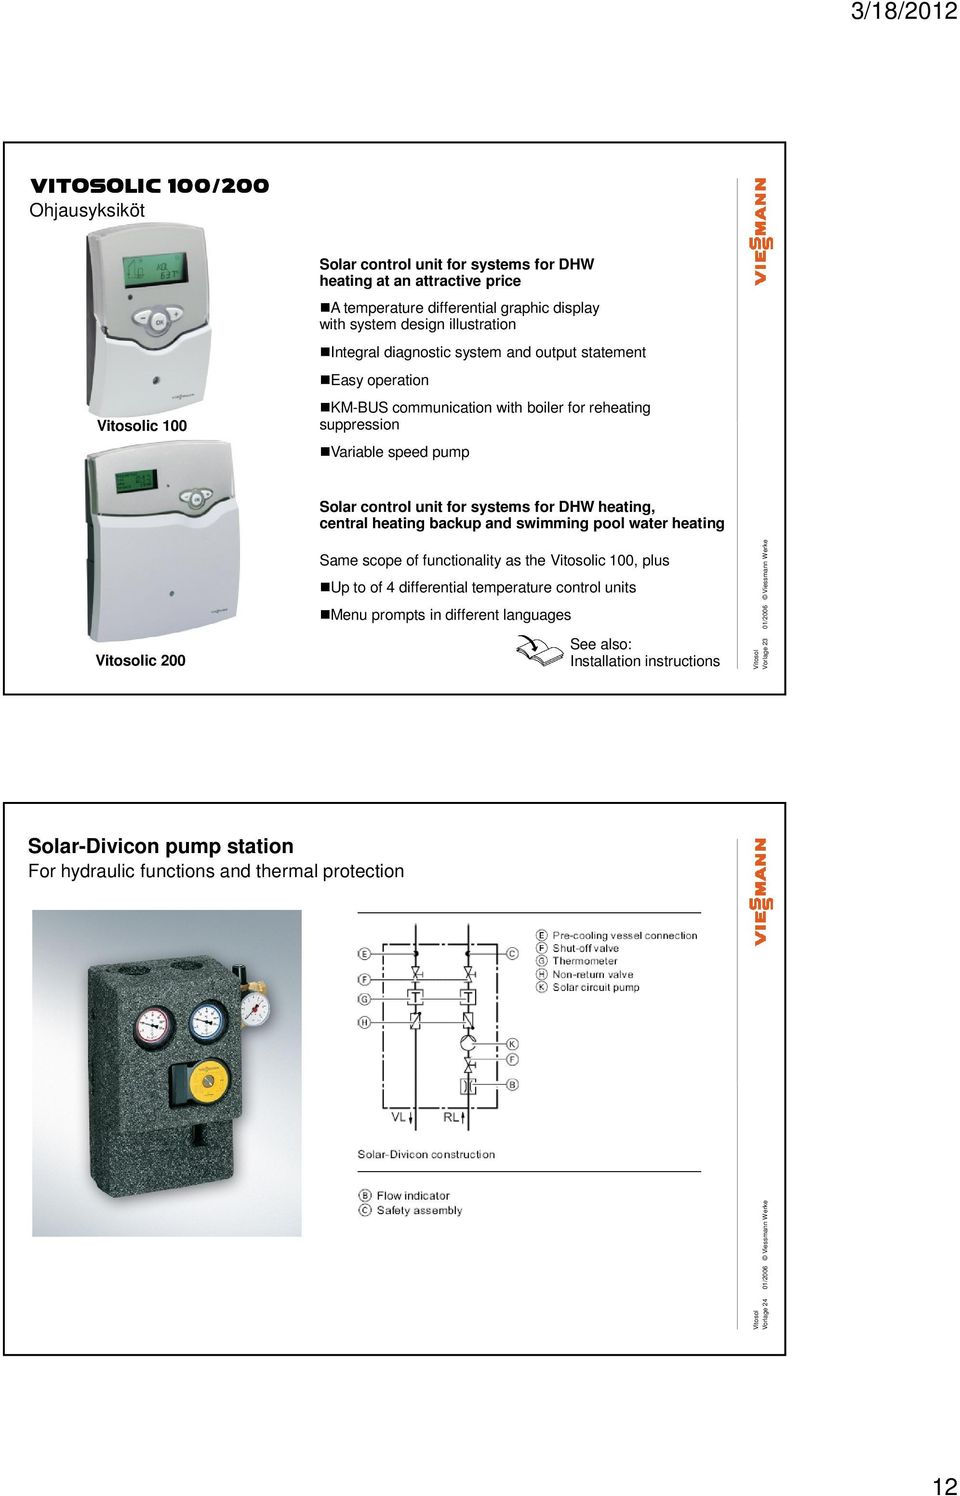 heating, central heating backup and swimming pool water heating ic 200 Same scope of functionality as the ic 100, plus Up to of 4 differential temperature control units Menu prompts in